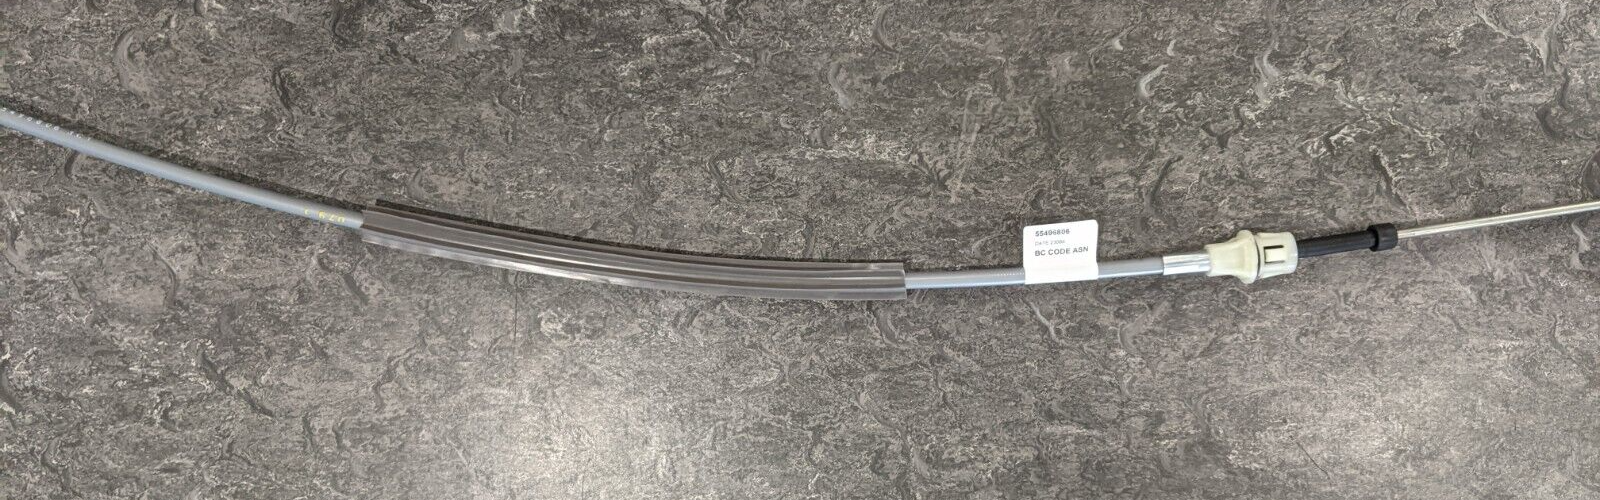 Vauxhall Adam Corsa 5 Speed Manual Gearshift Linkage Cable New OE Part 55496806